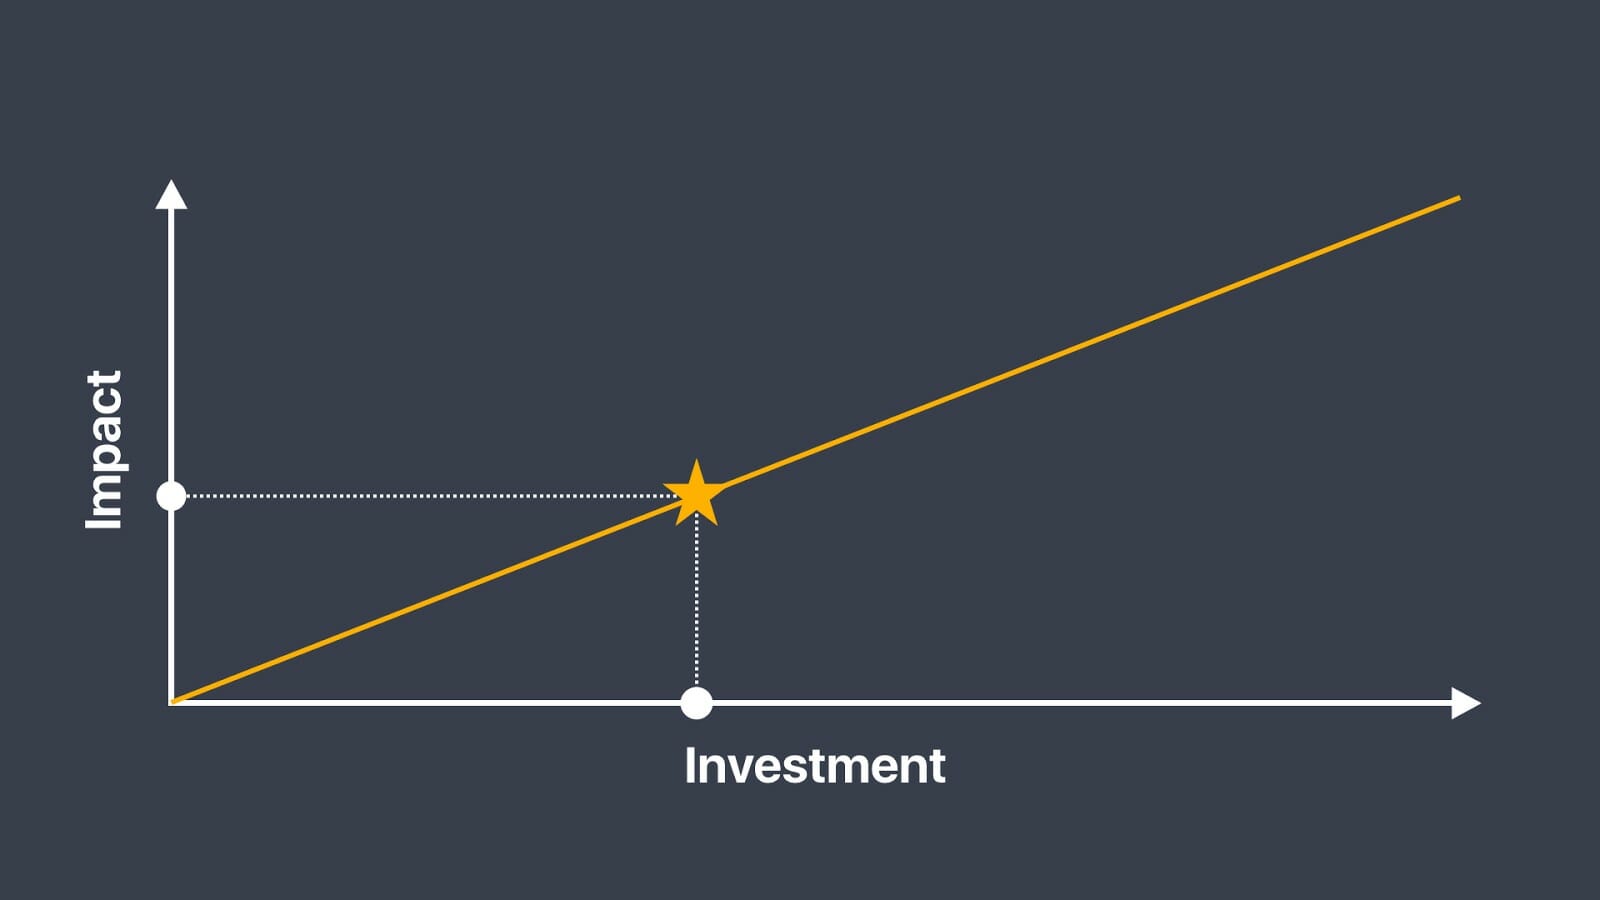 a graph showing the correlation of impact and investment with your investment increasing as the impact increases